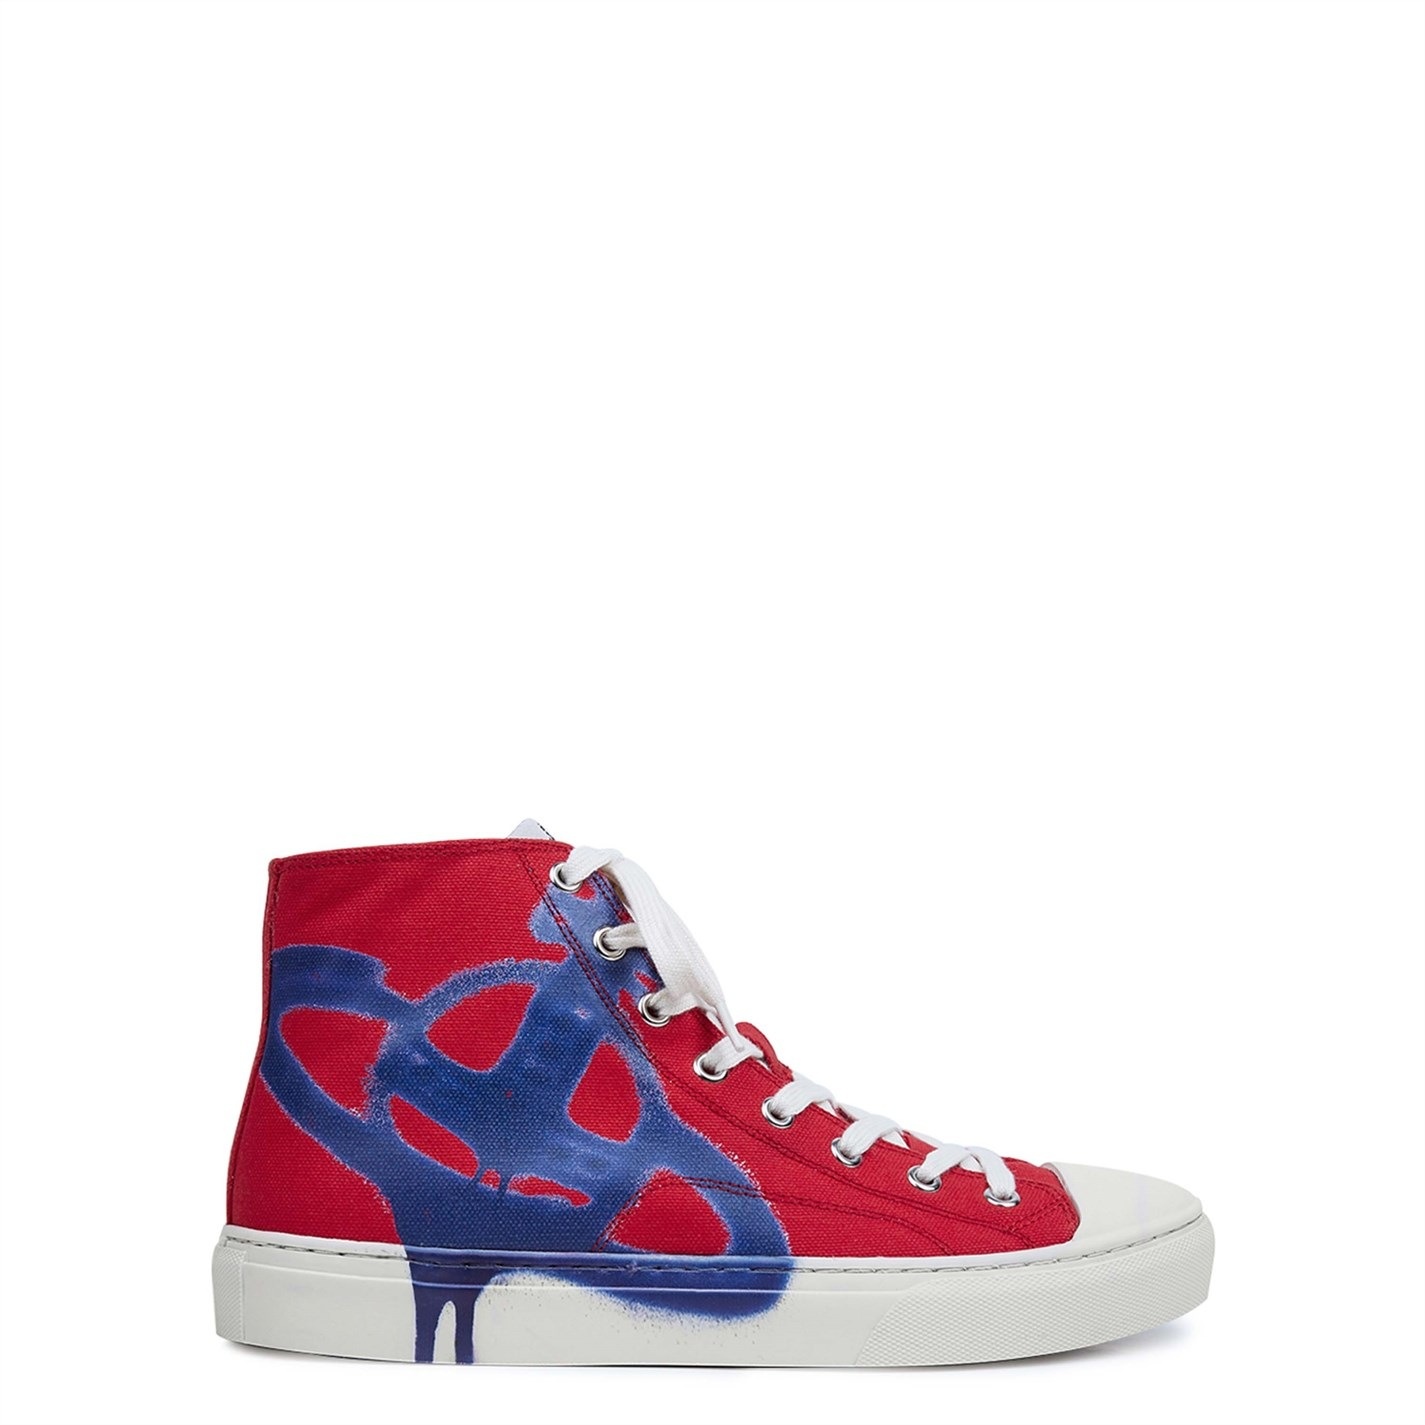 PLIMSOLL HIGH TOP TRAINERS - 1